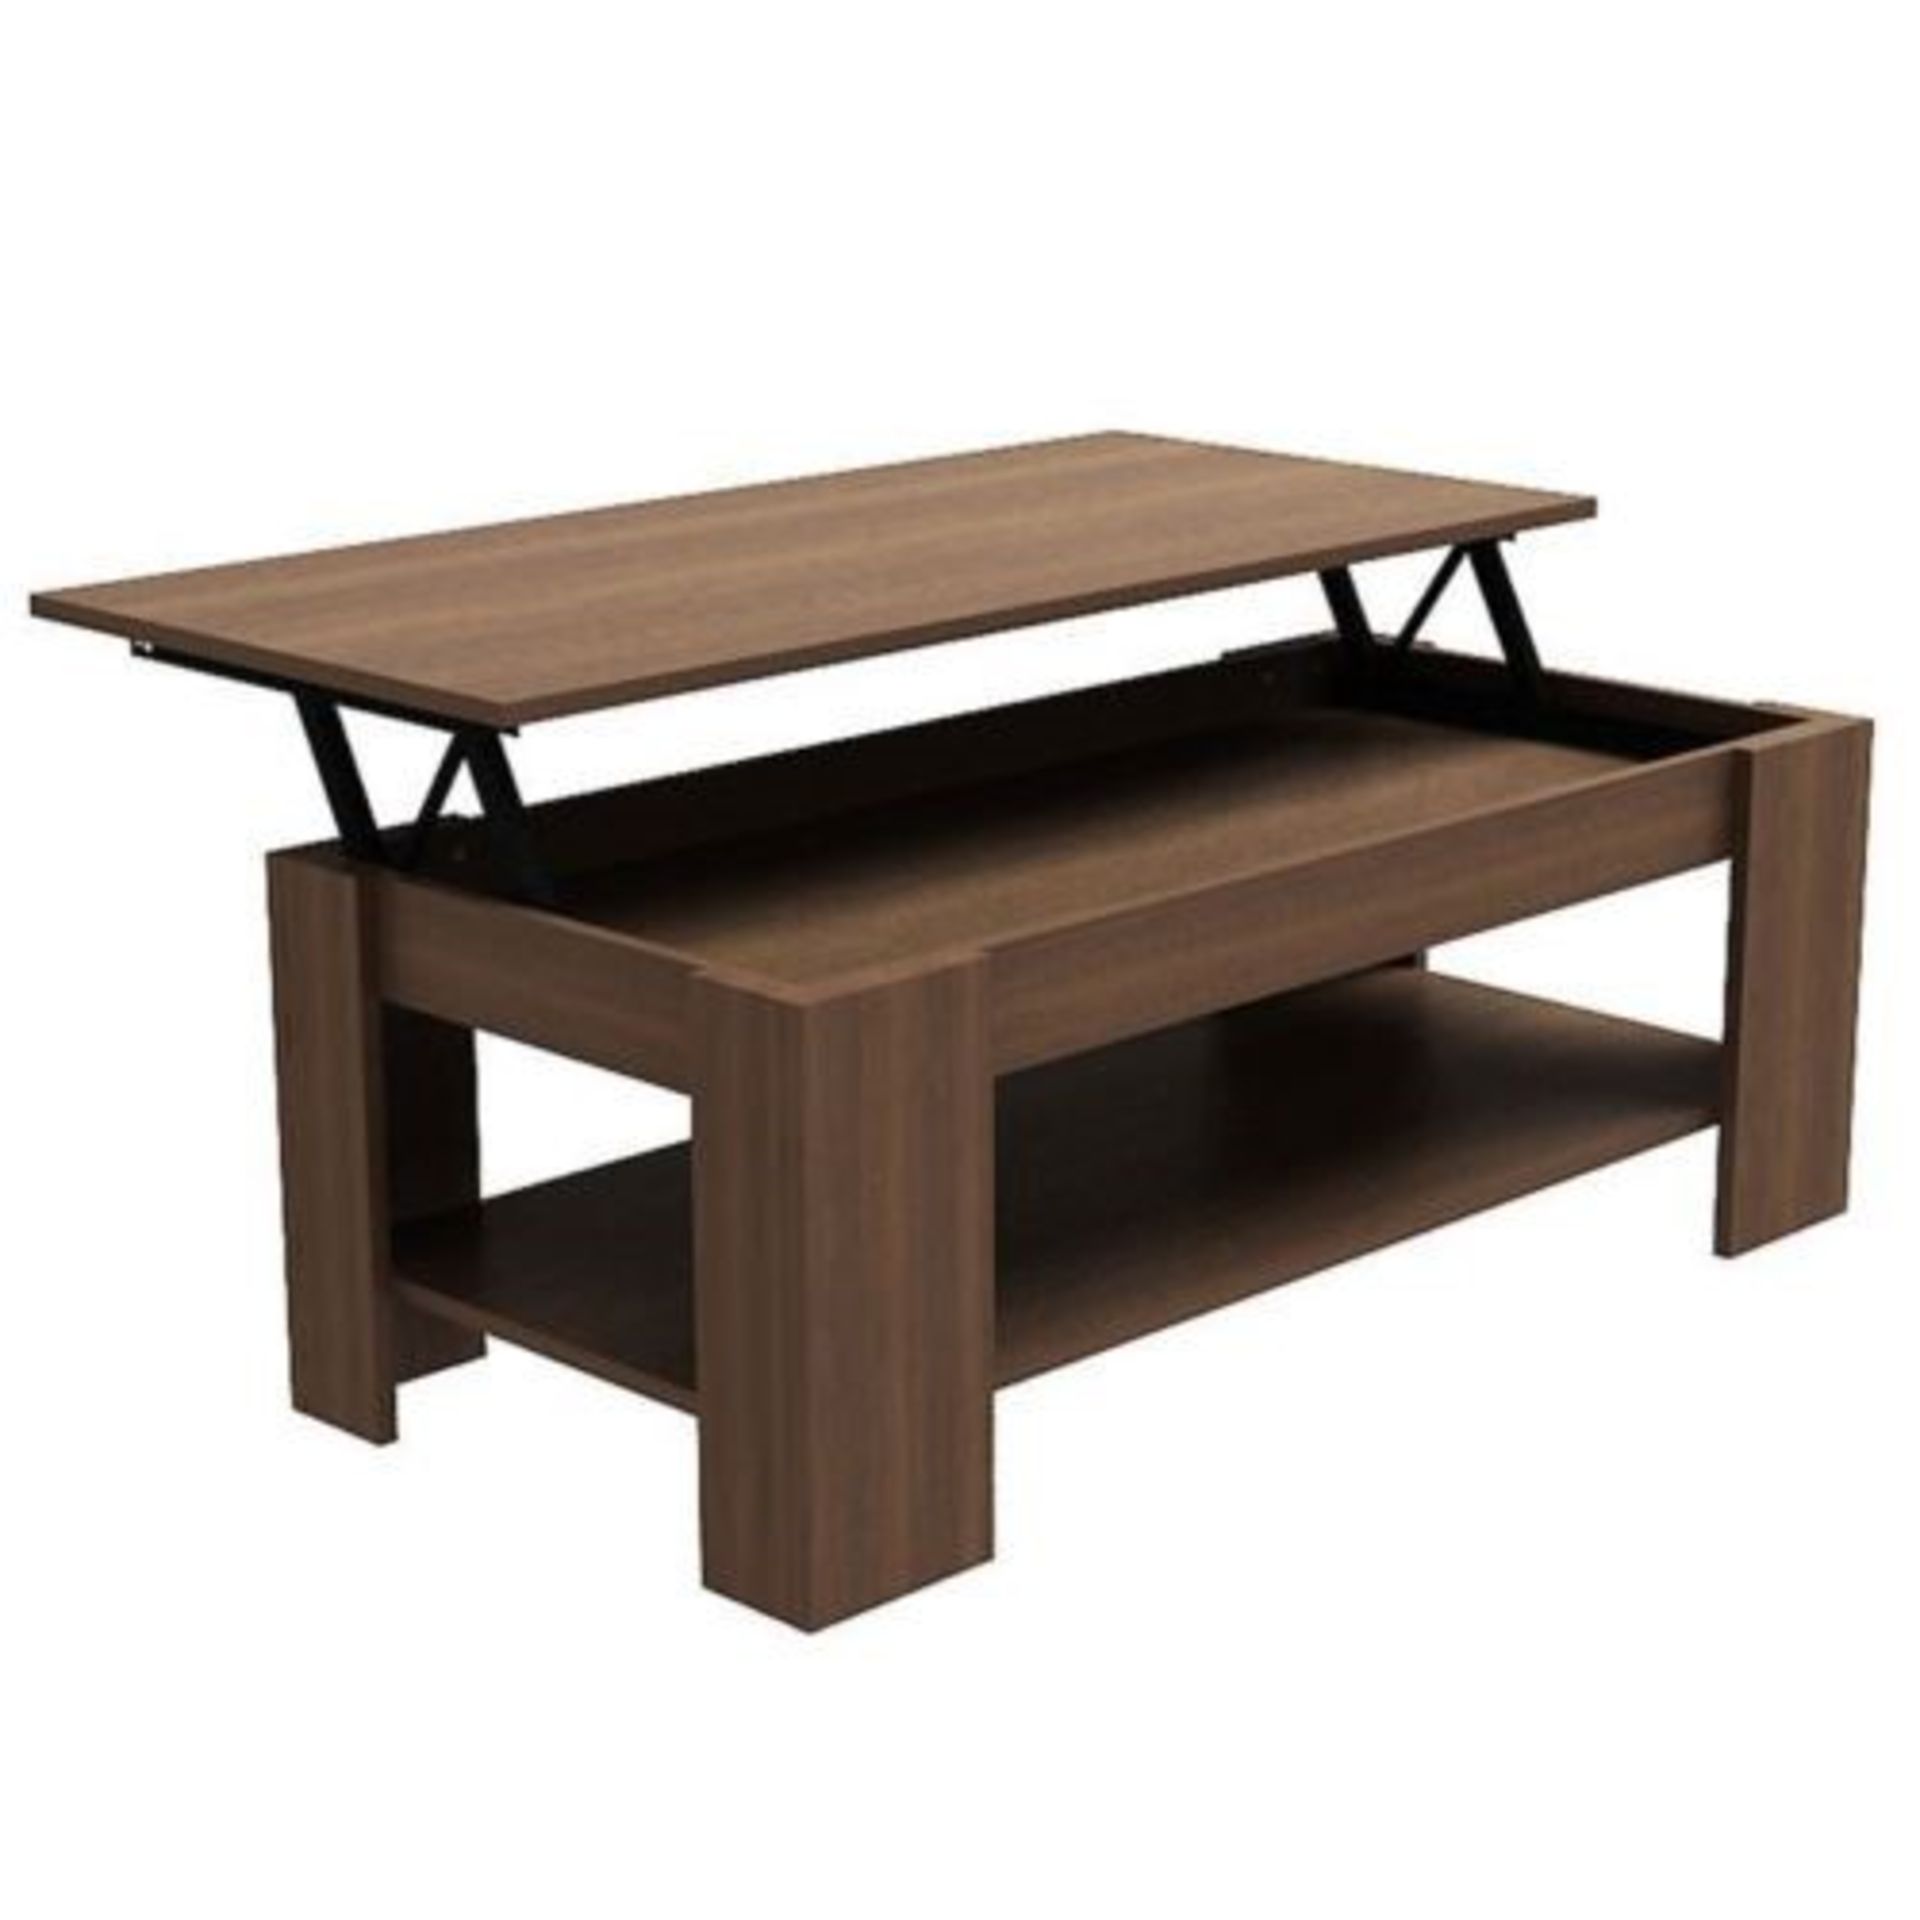 1 x "Caspian" Lift Up Top Coffee Table with Storage - Colour: WALNUT - Sleek Modern Design - - Image 2 of 2